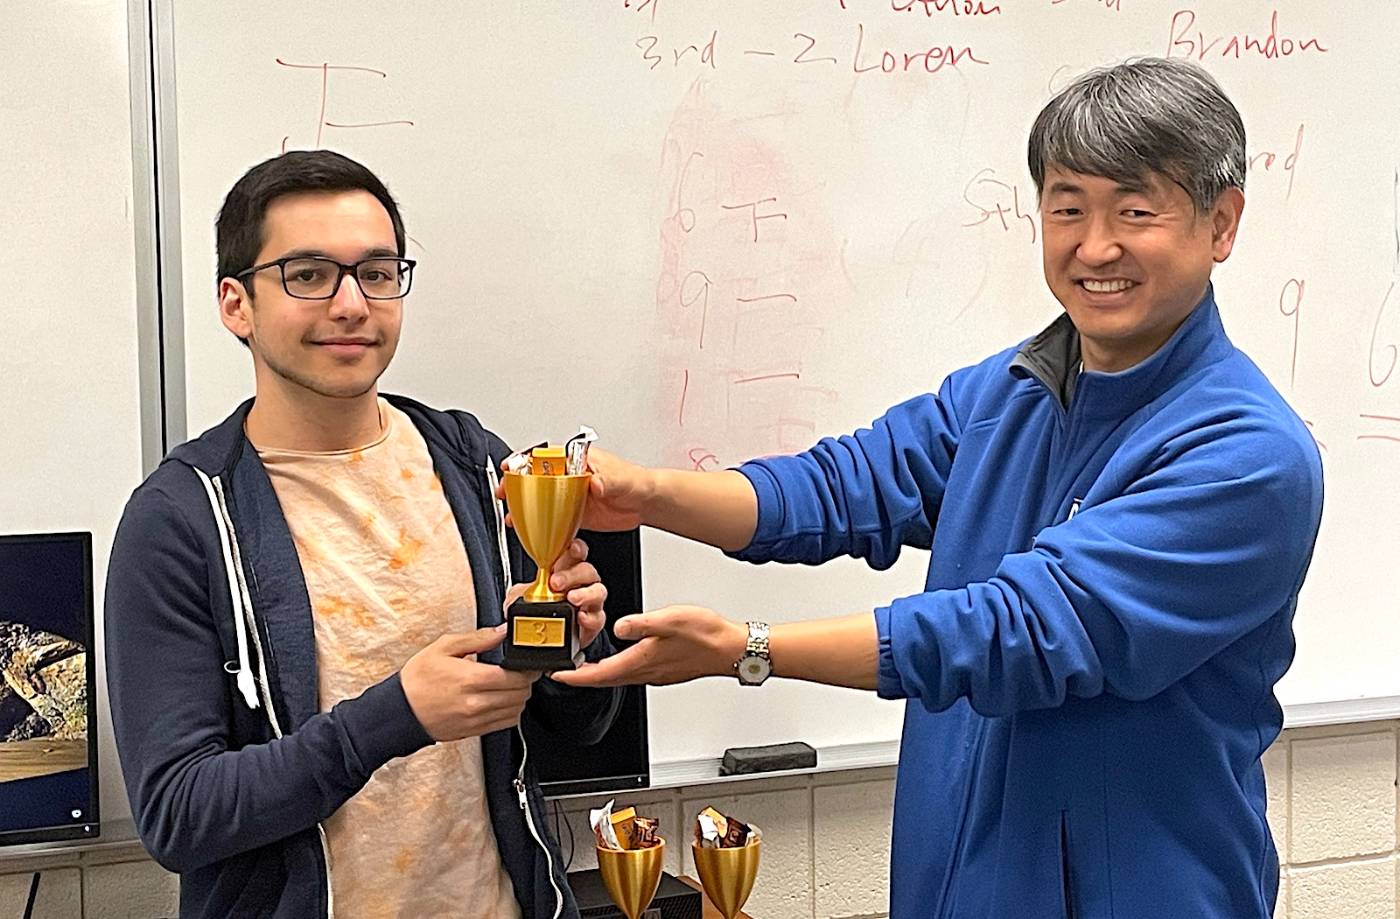 IT student and instructor in classroom with competition trophy